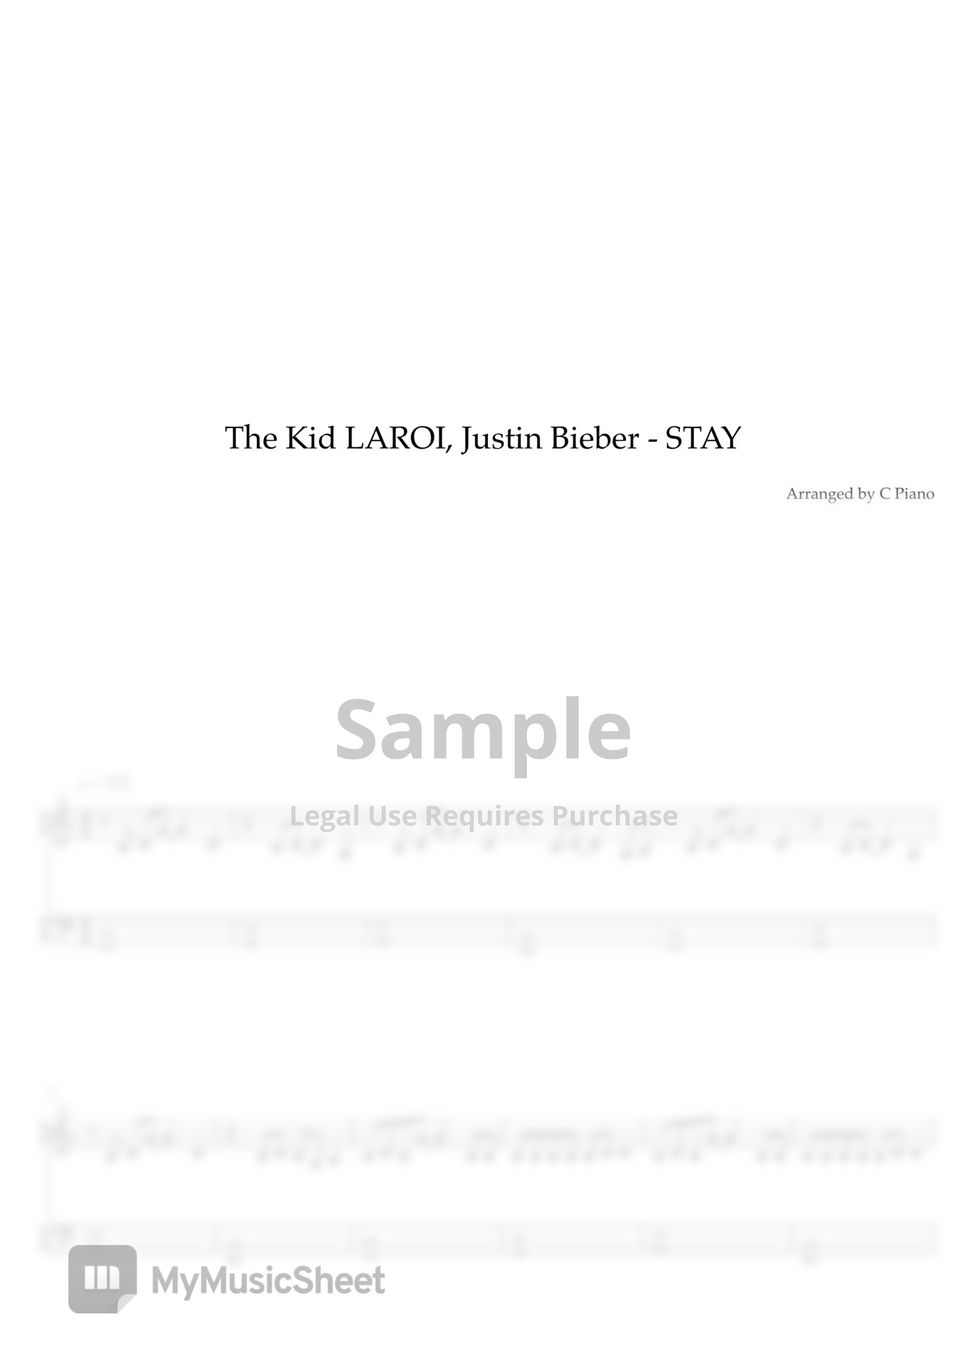 The Kid LAROI, Justin Bieber - Stay (Easy Version) by C Piano